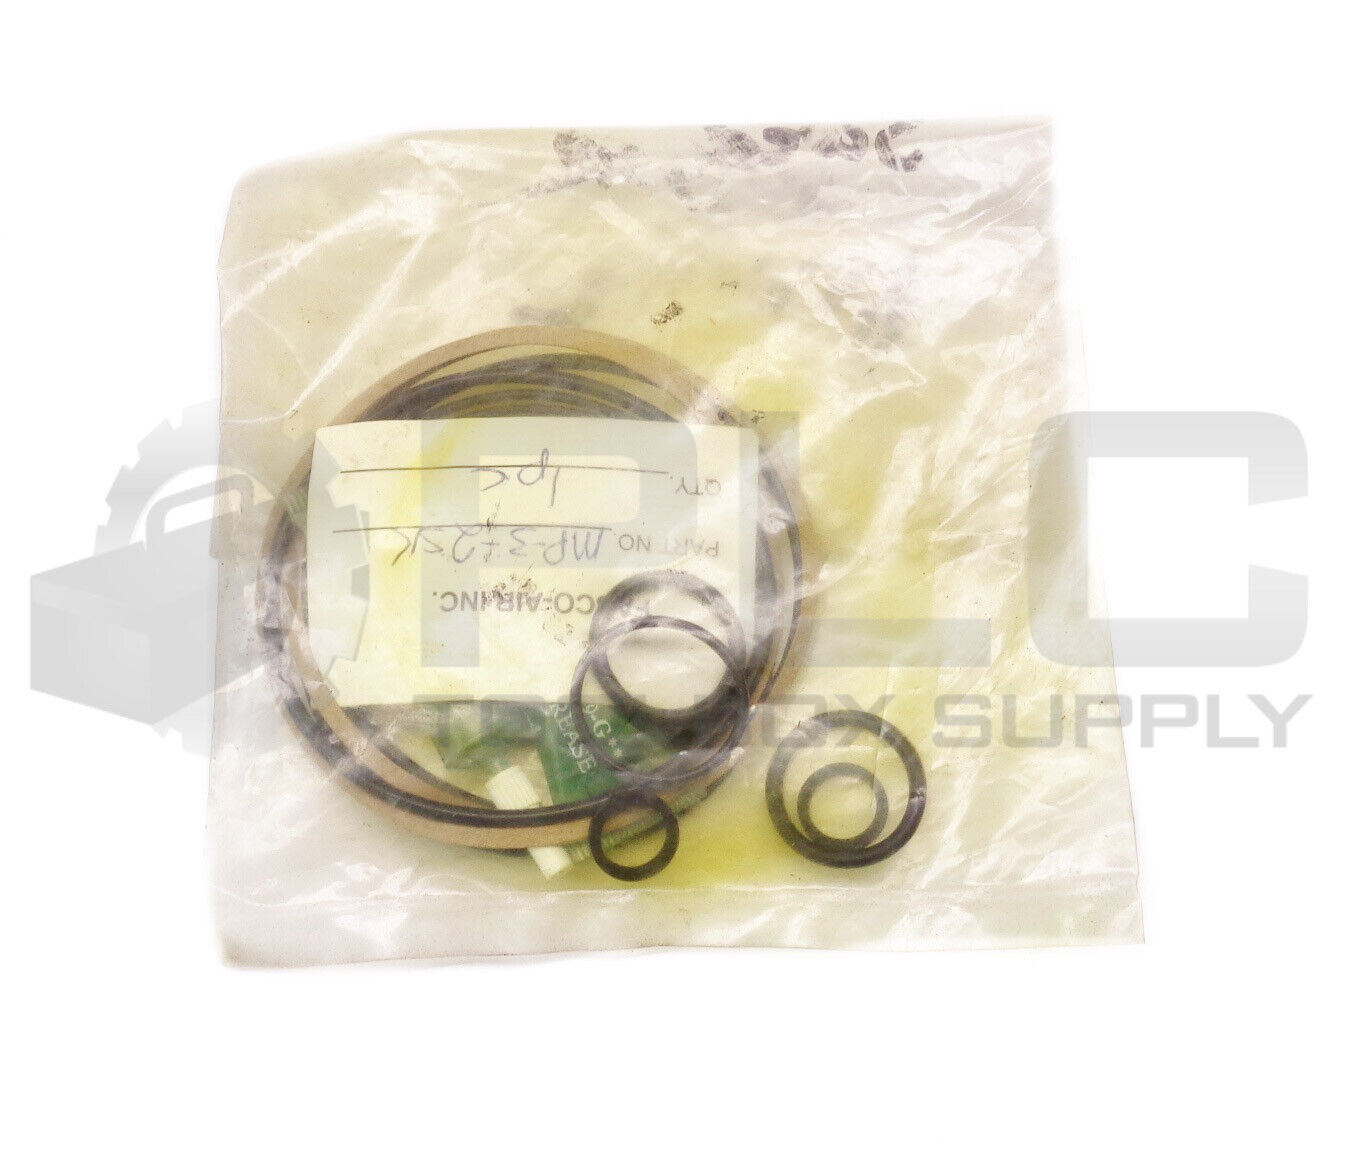 NEW FABCO-AIR MP-3-2SK MULTI-POWER SEAL KIT FOR 3\